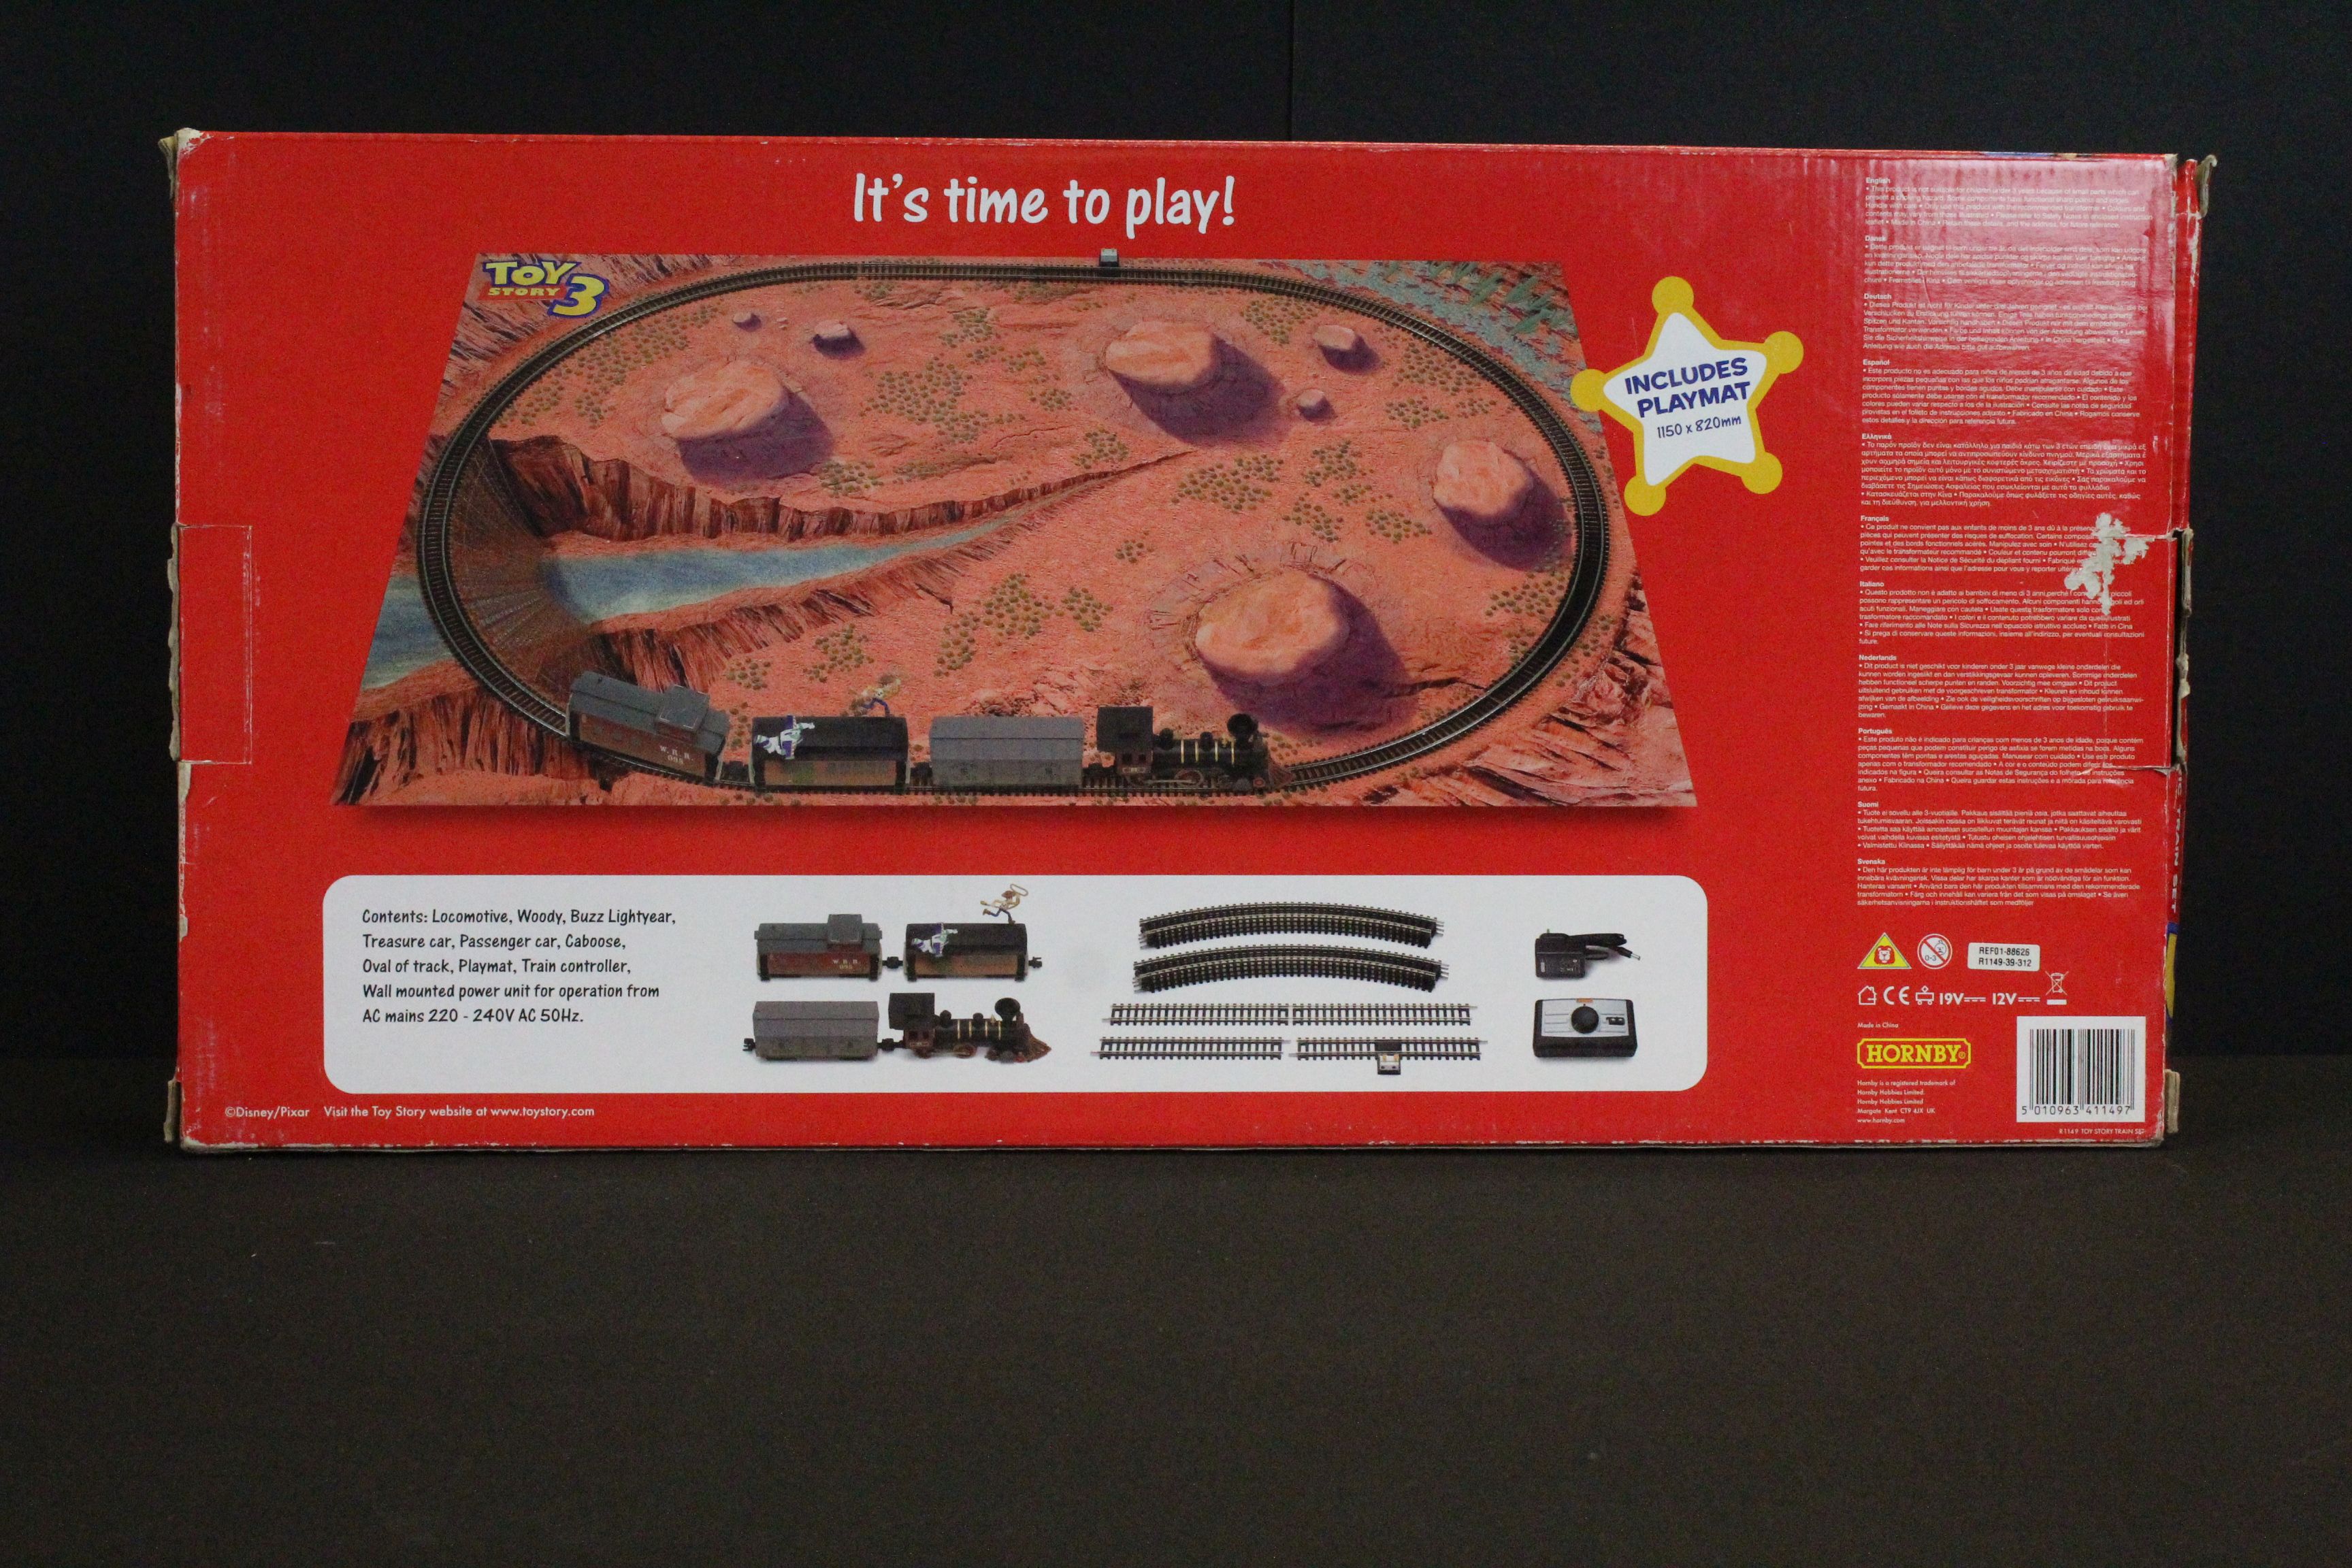 Boxed Hornby OO gauge R1149 Toy Story 3 train set, complete with locomotive, rolling stock etc - Image 2 of 7